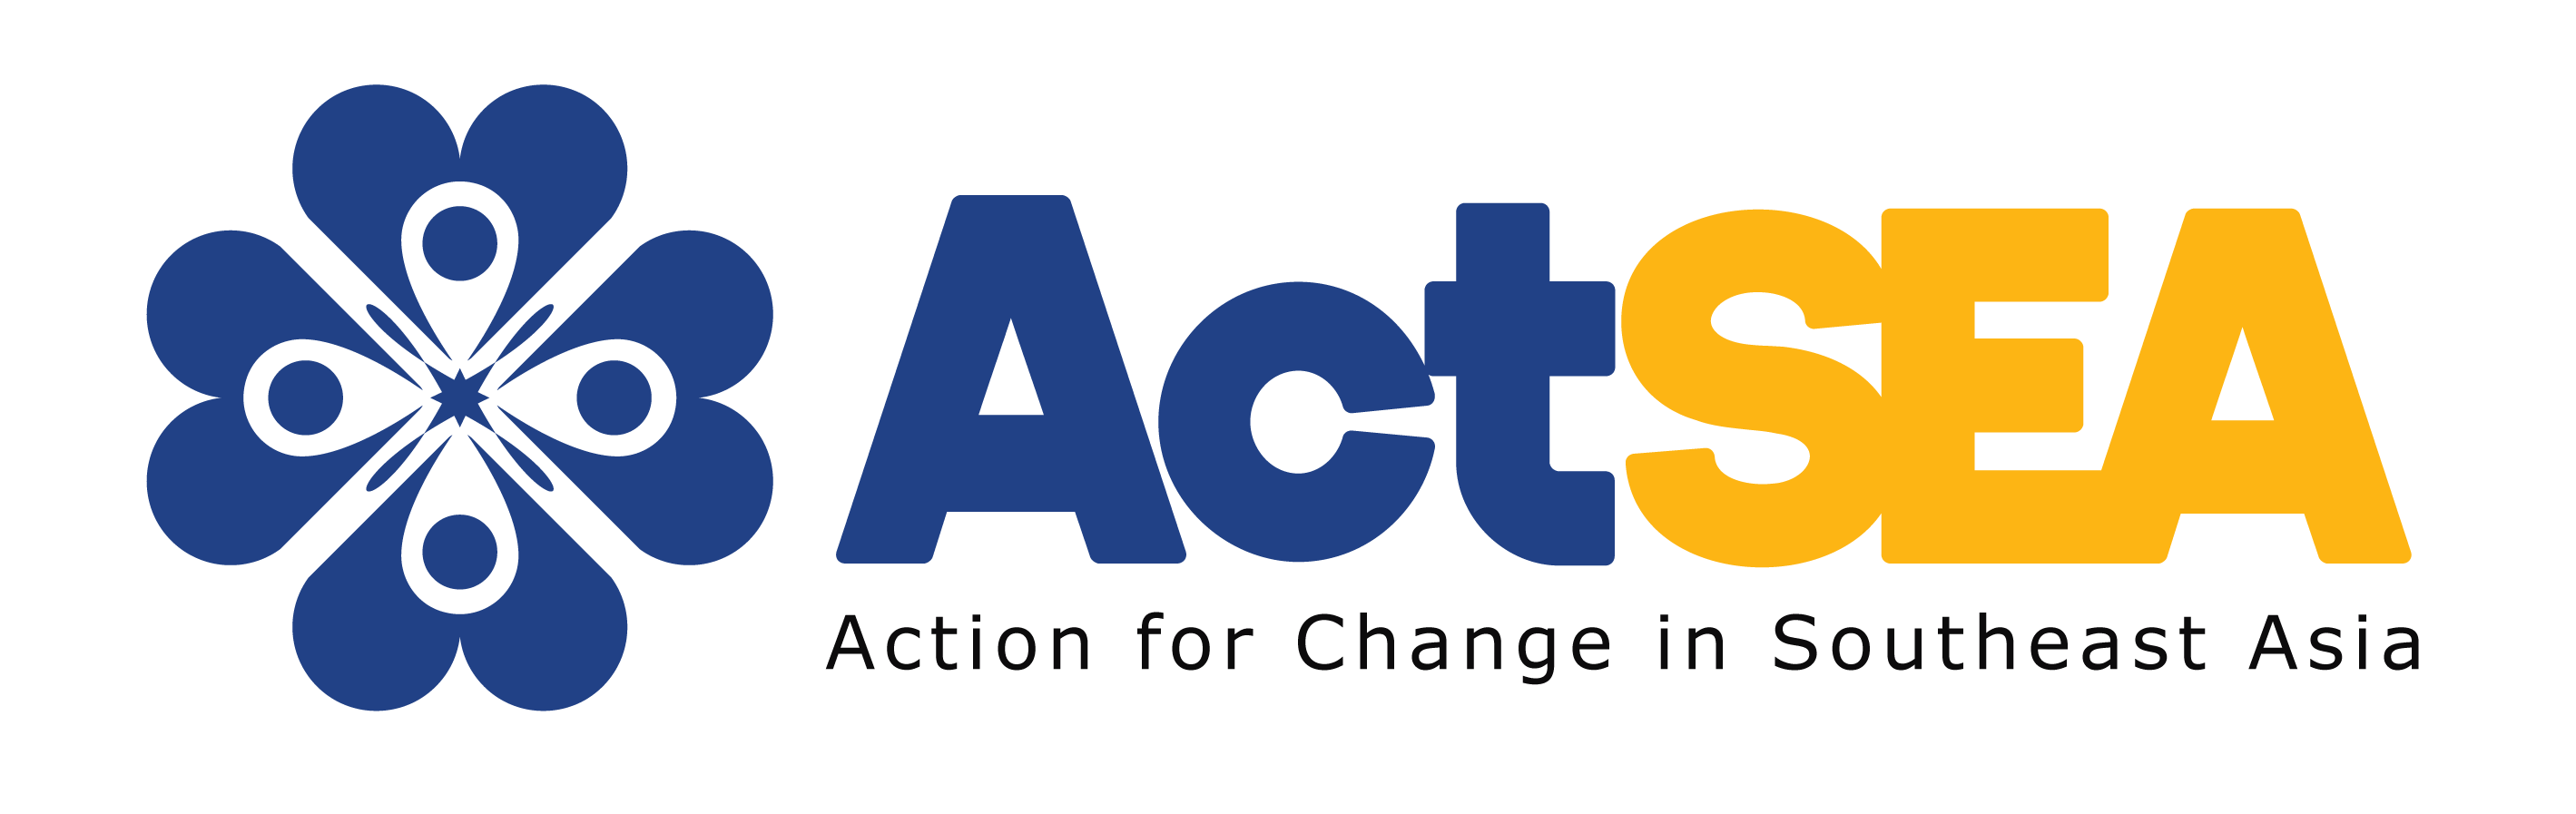 Action For Change In Southeast Asia Limited company logo